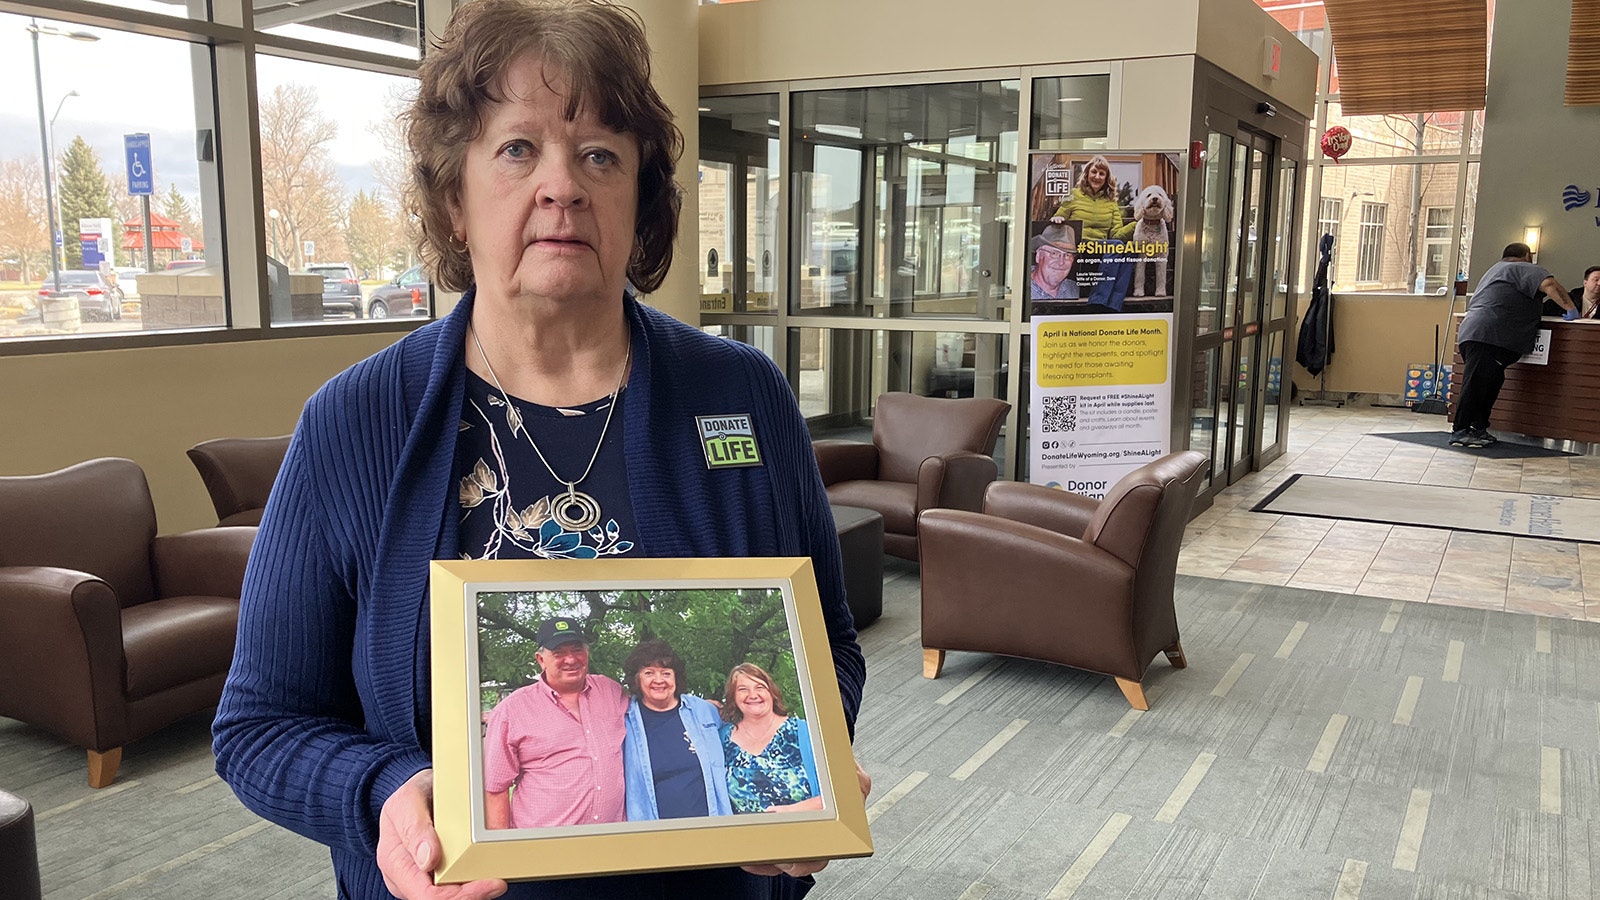 Kidney recipient Anne Bina holds a photo of the parents of the boy whose donated kidney has given her life. The couple and Bina now have a close relationship.